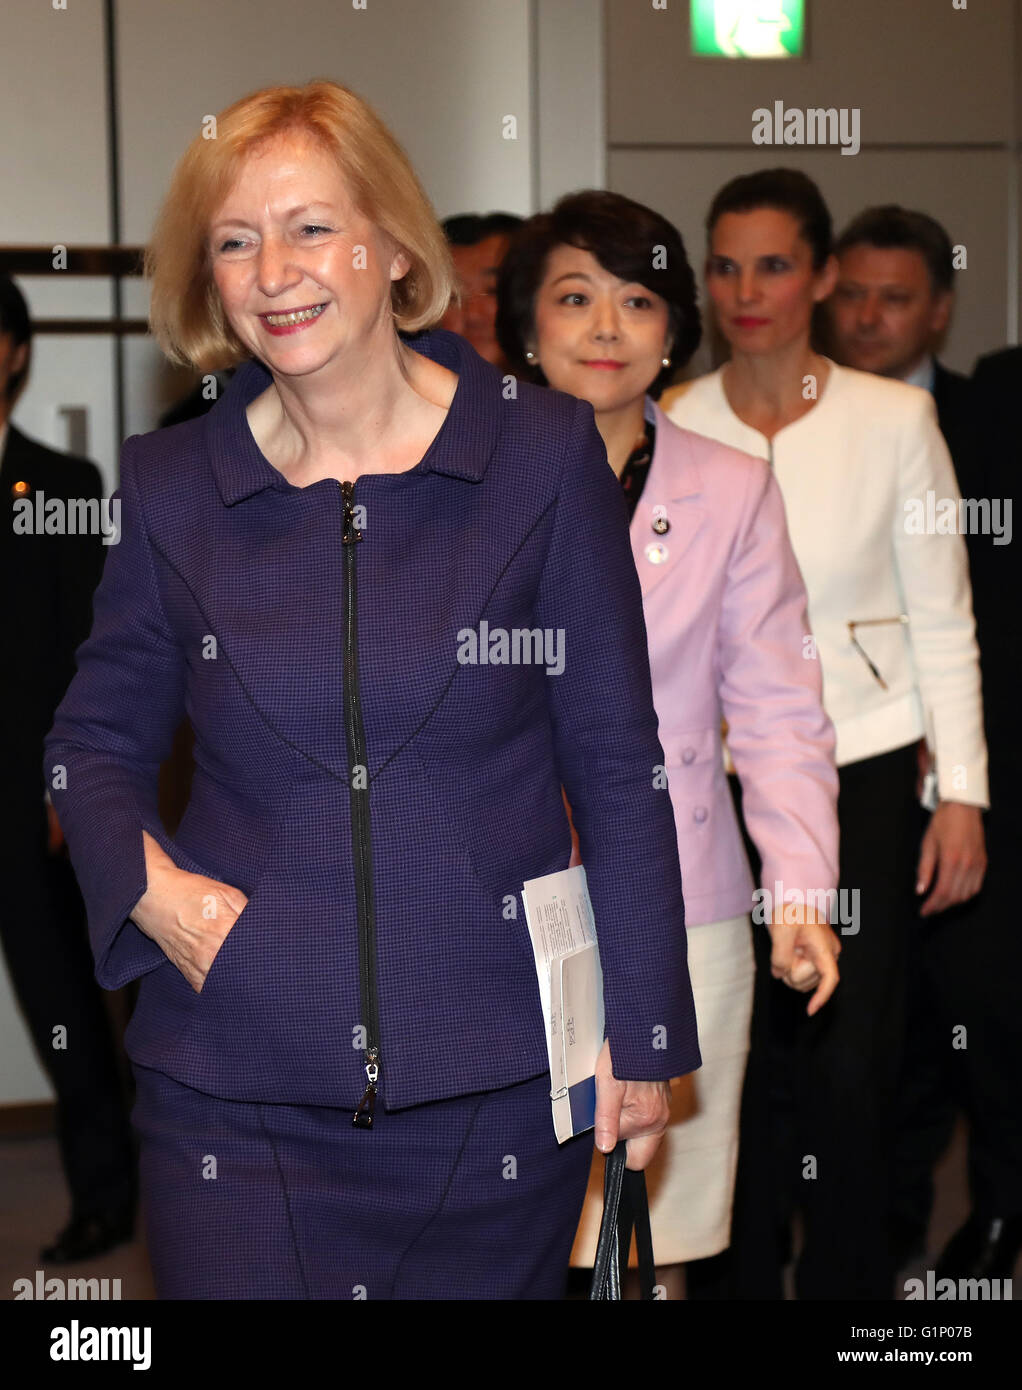 Tsukuba, Japan. 17th May, 2016. German Education and Research Minister Johanna Wanka (L), Japanese Science and Technology Minister Aiko Shimajiri (C) and Canadian Science Minister Kirsty Duncan (R) enter the conference room to have press conference after the G7 Science and Technology Ministers' Meeting in Tsukuba in Ibaraki prefecture on Tuesday, May 17, 2016. © Yoshio Tsunoda/AFLO/Alamy Live News Stock Photo